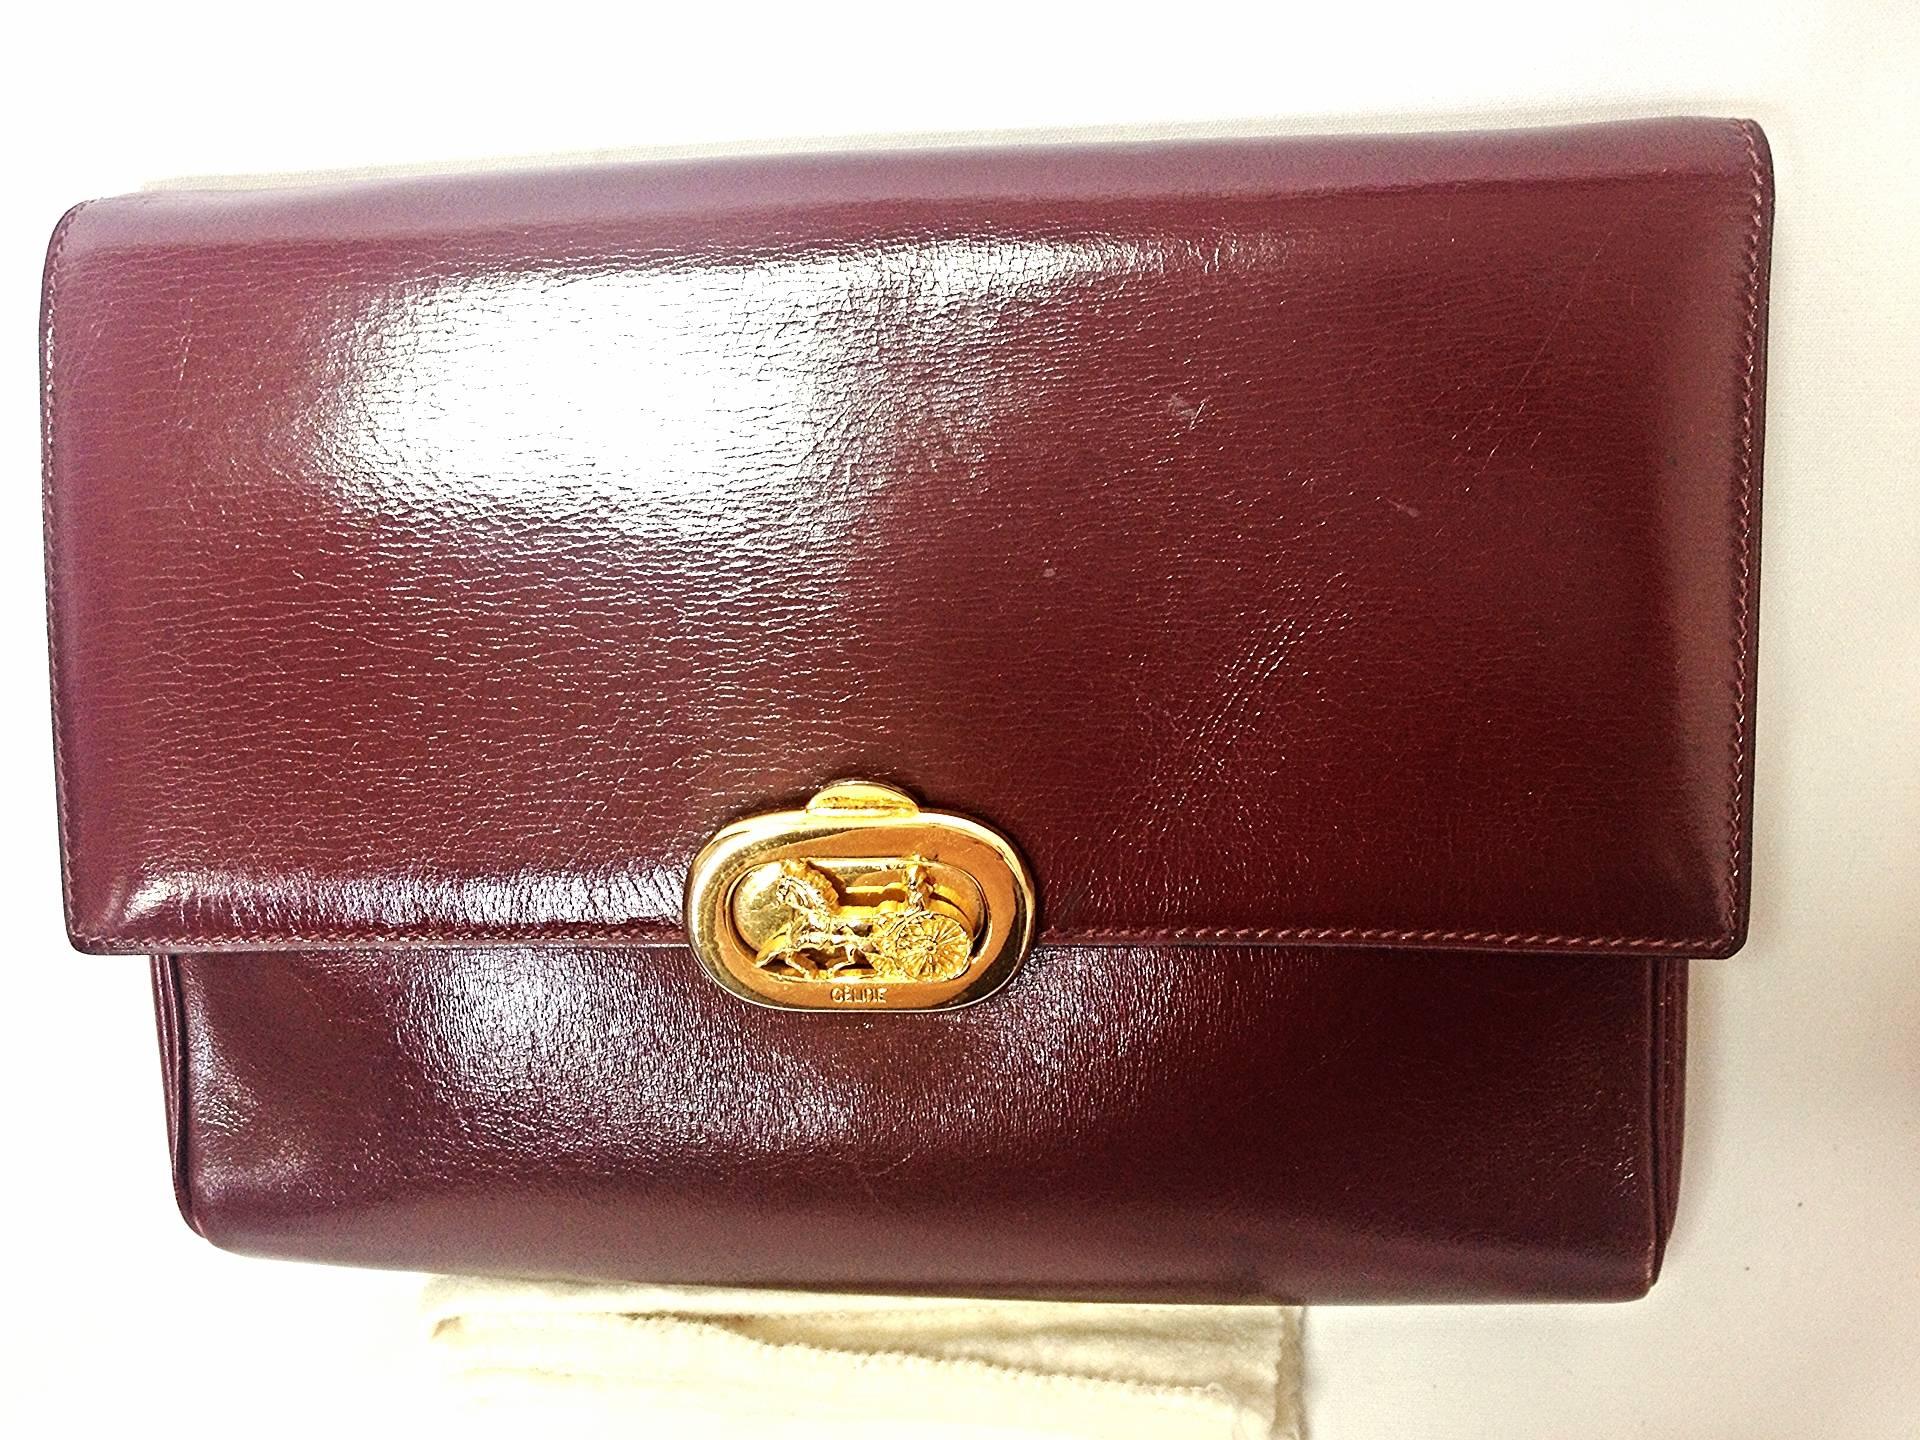 Brown intage CELINE genuine wine brown leather clutch bag with golden carriage logo.